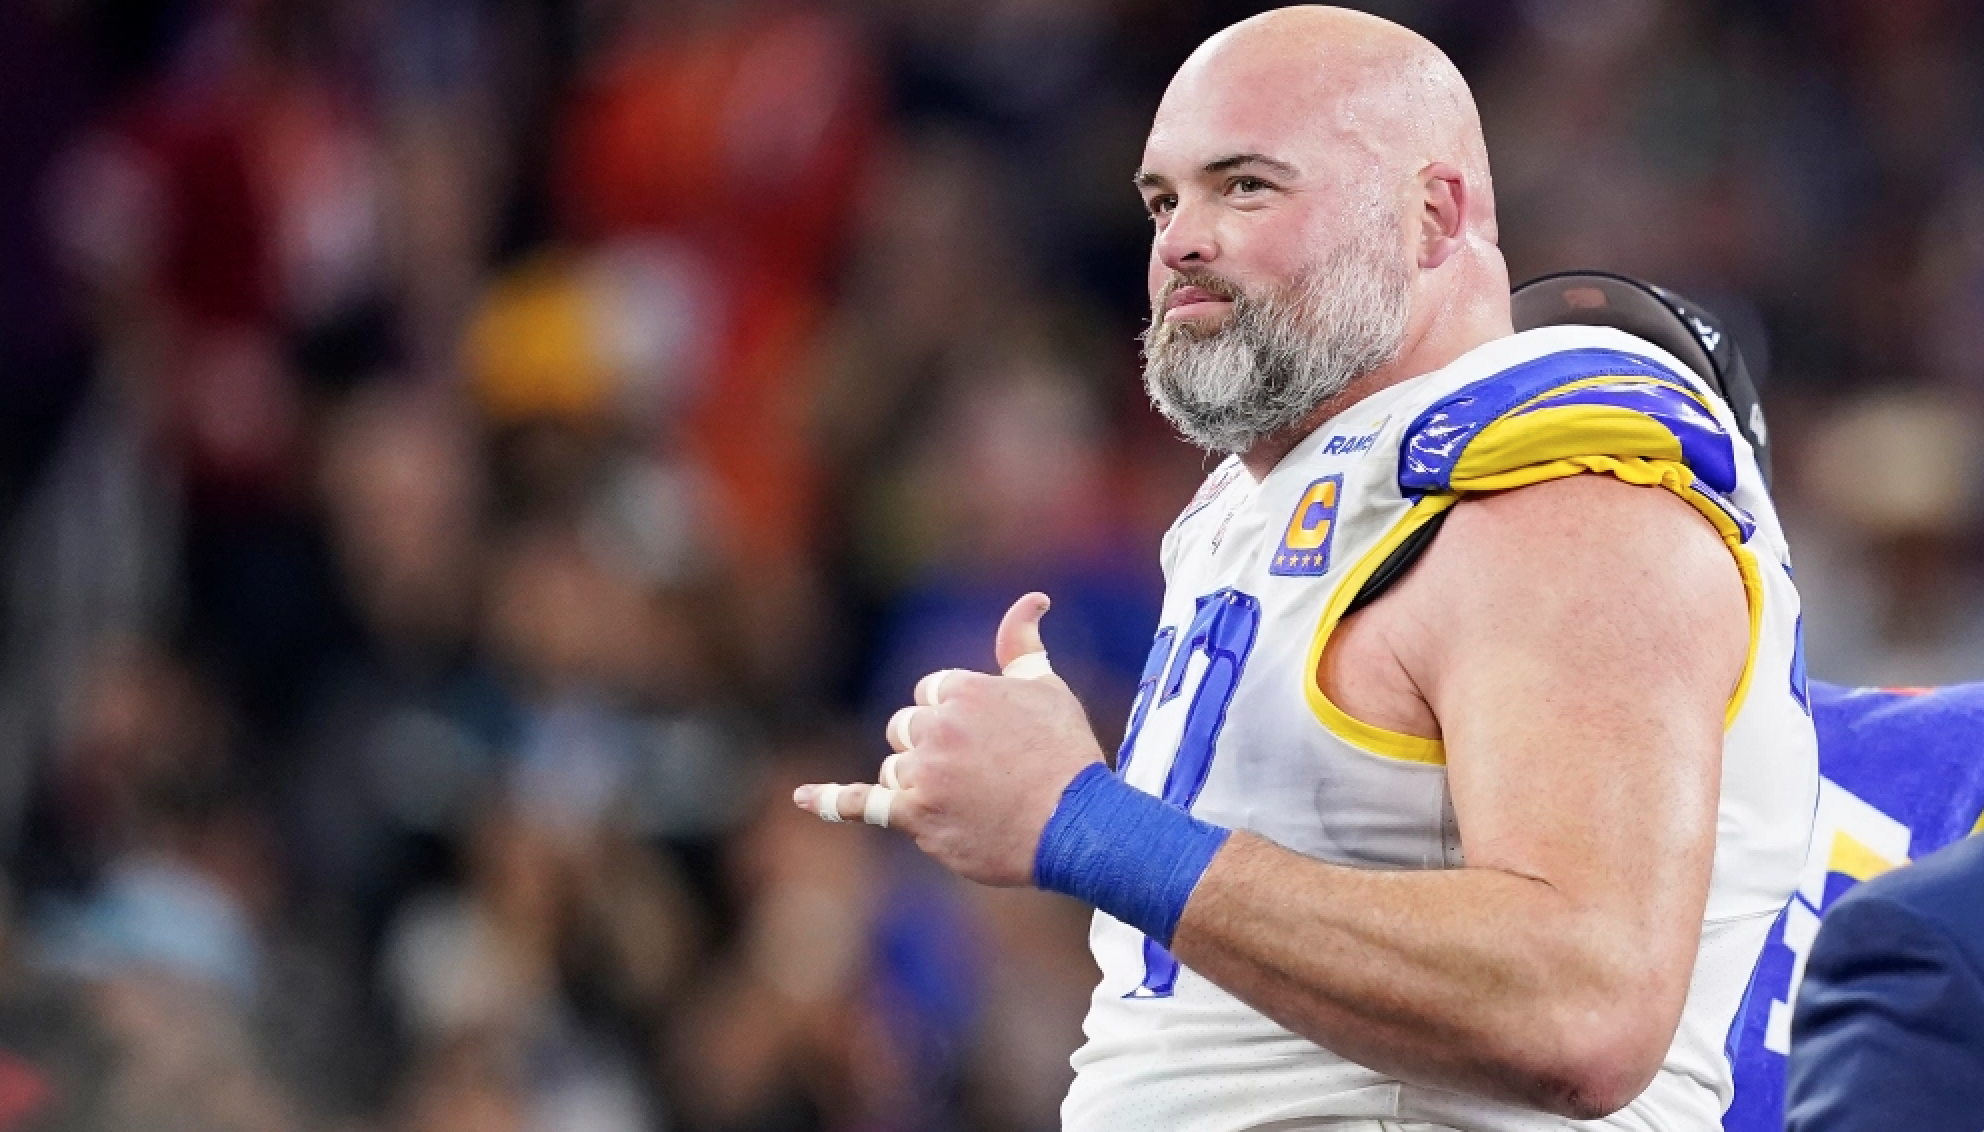 Cowboys have reportedly reached out to recently retired Pro Bowl OT Andrew Whitworth